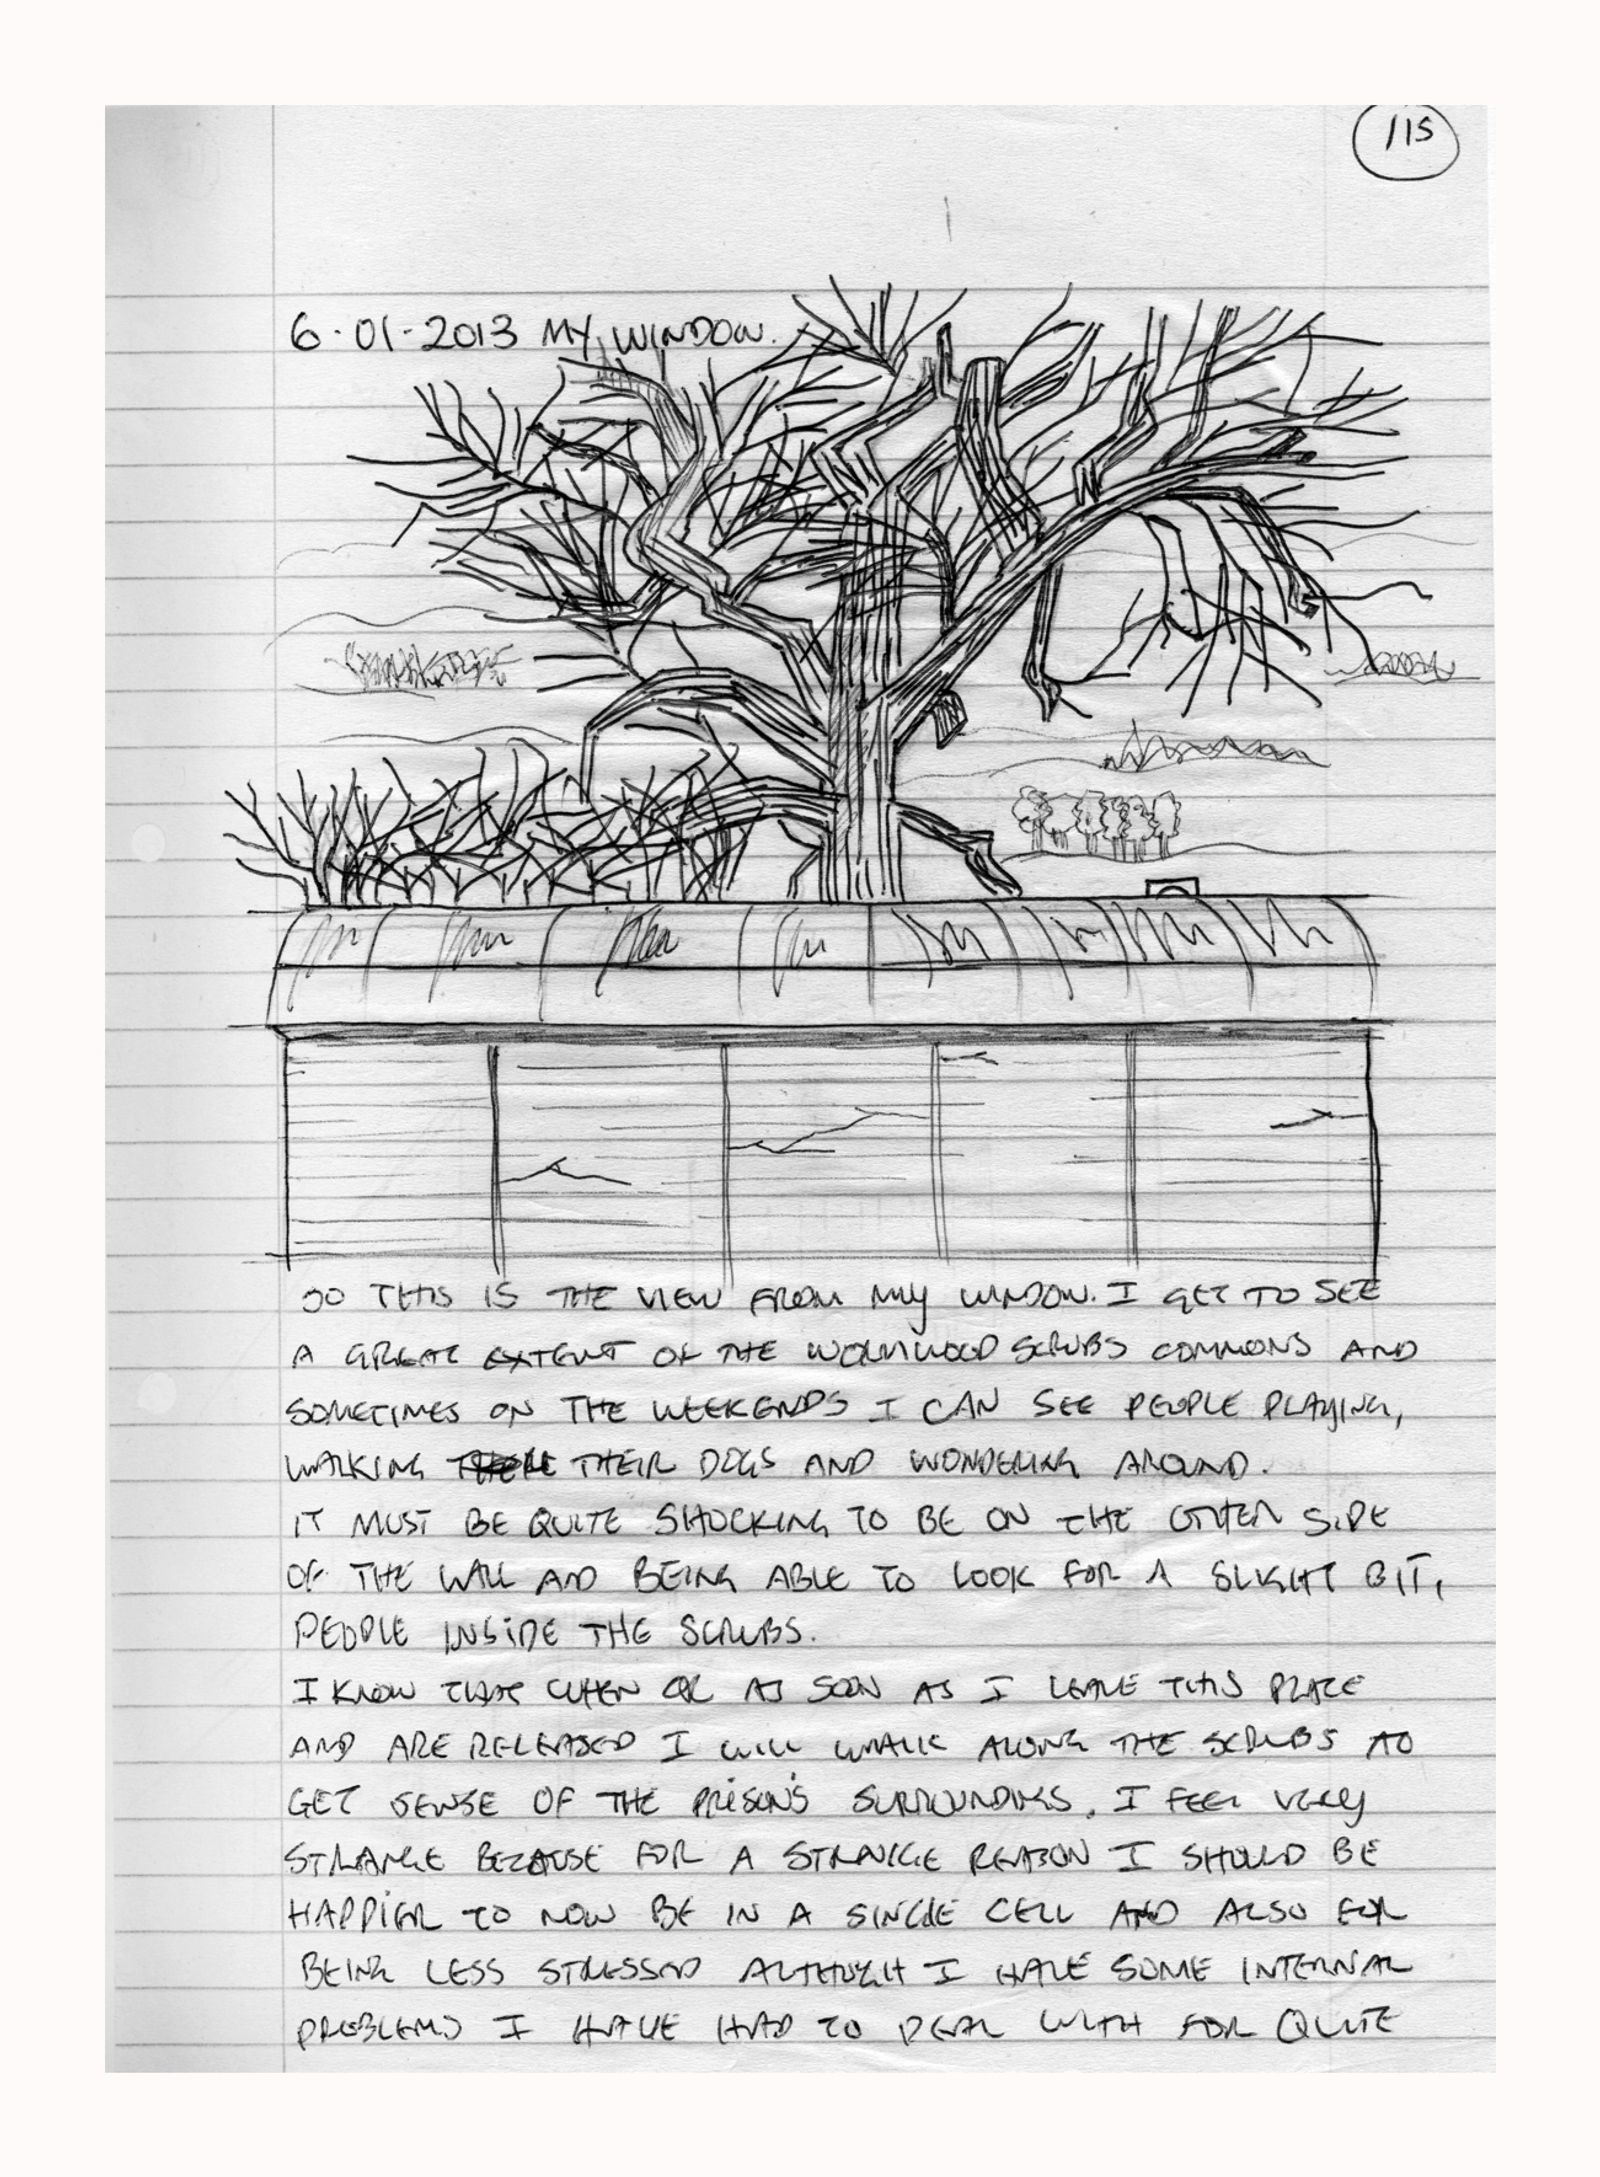 © Roxana and Pablo Allison - Diary, Tree sketch from cell window, Wormwood Scrubs, 2012